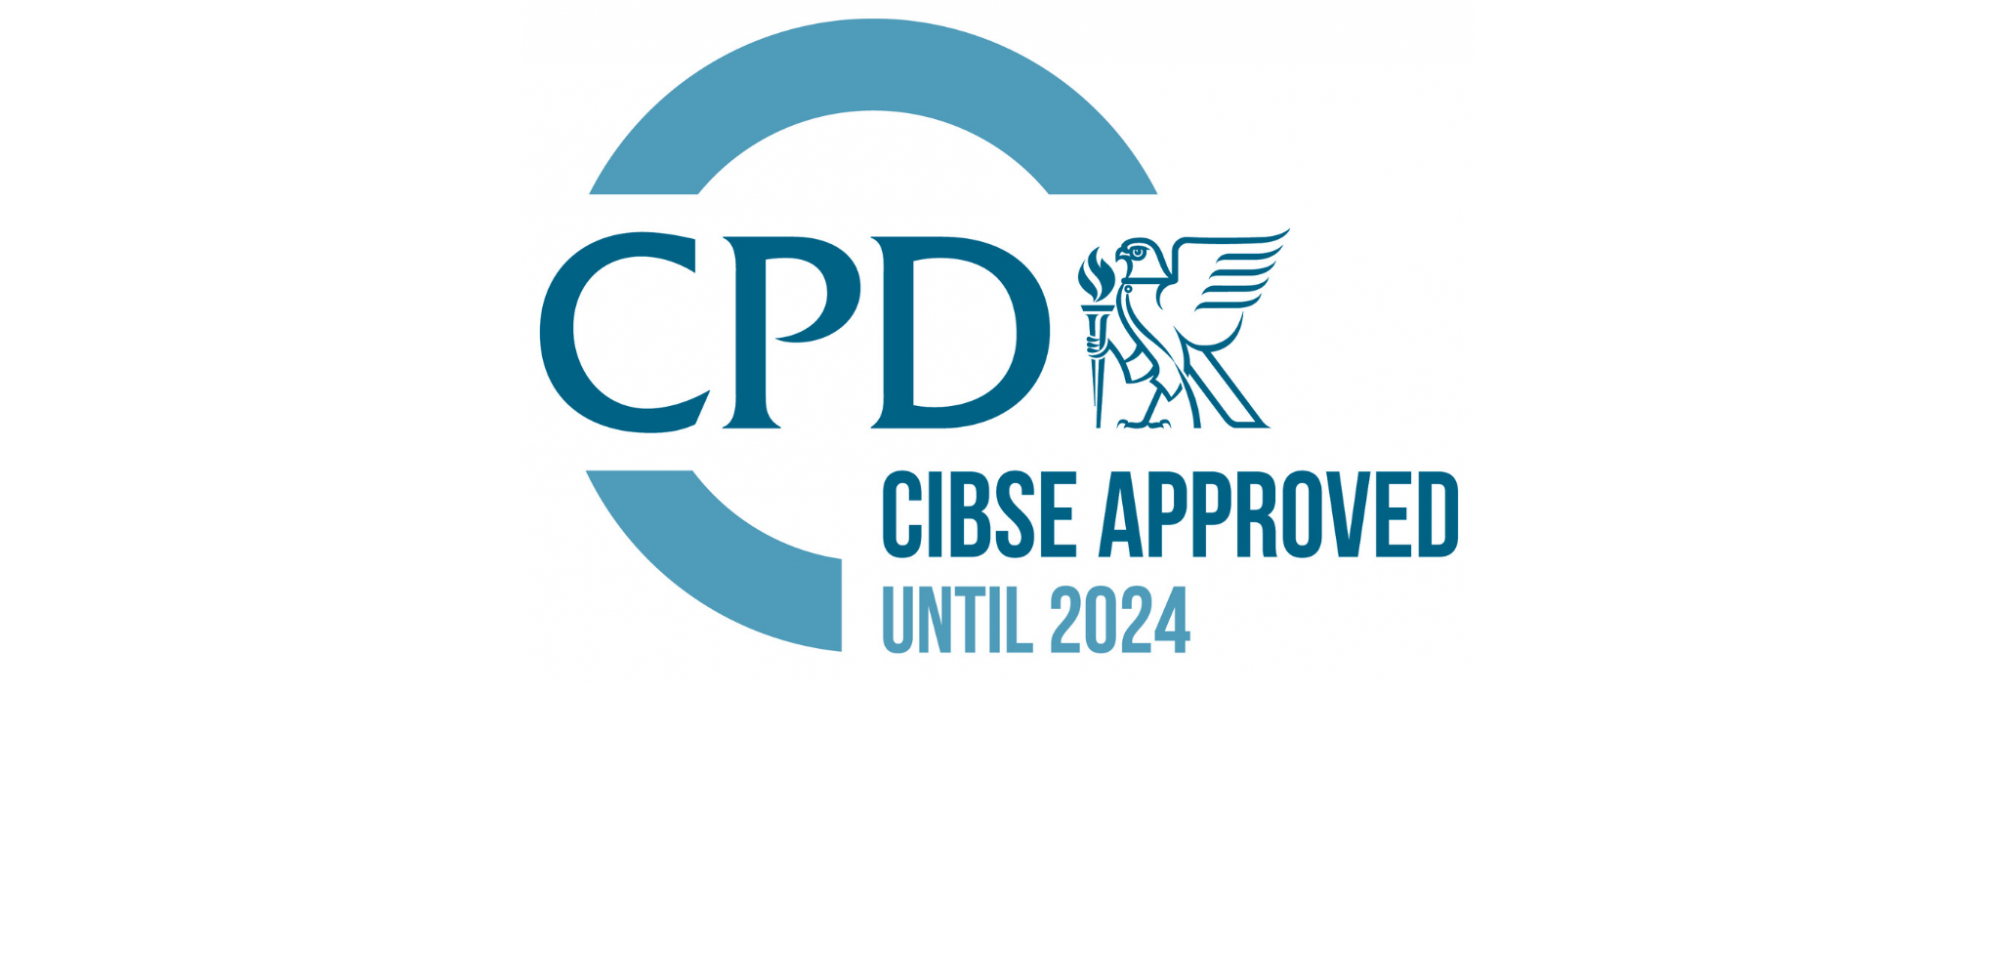 CPD/CIBSE